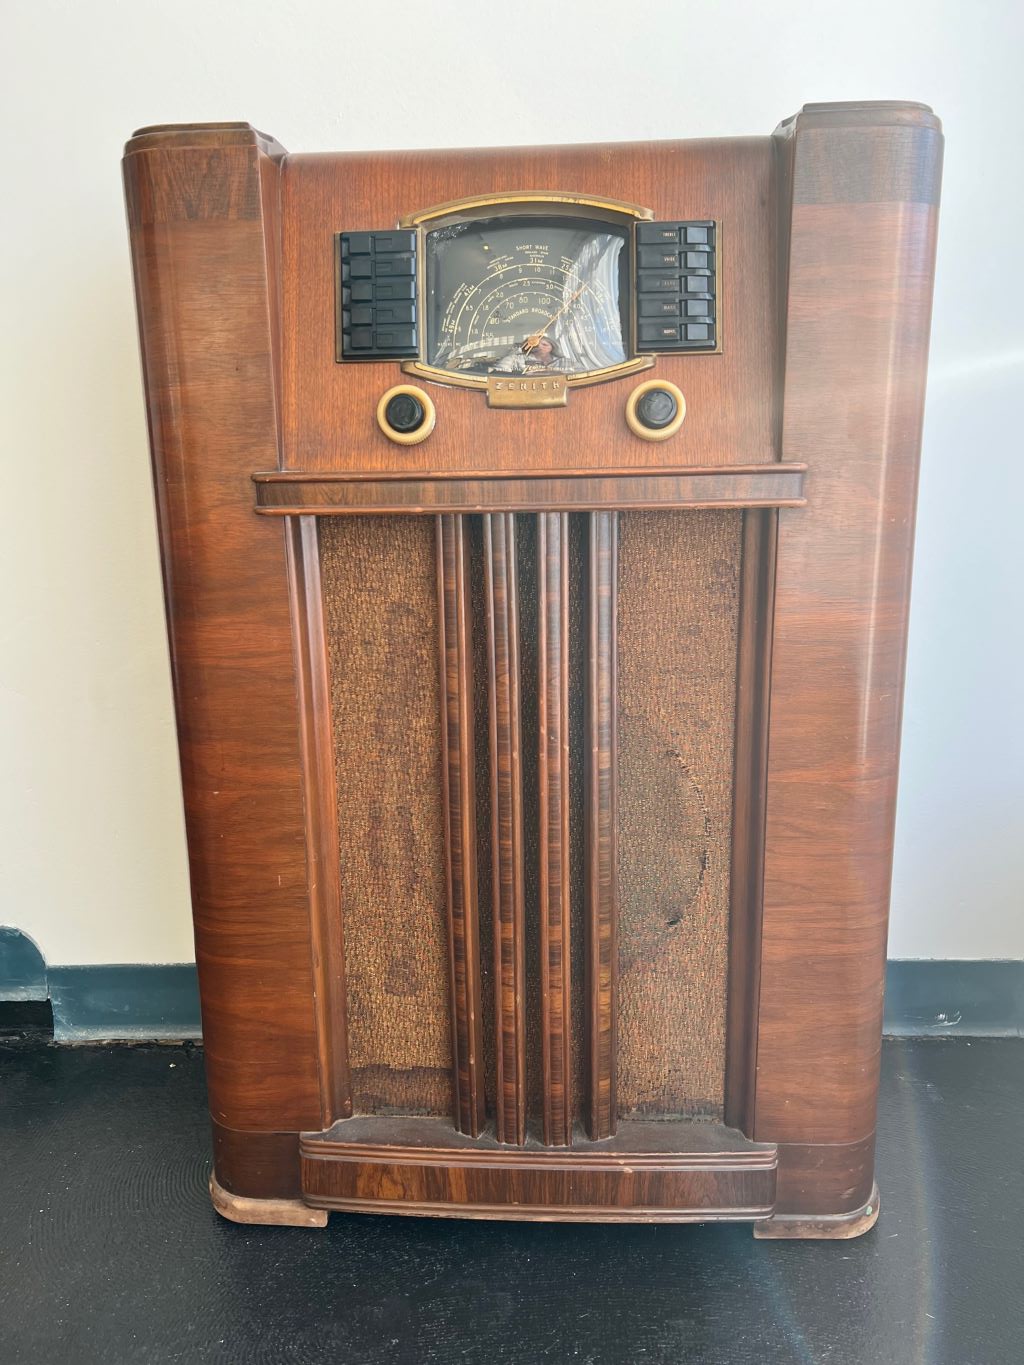 An old stand-up wooden radio with black and gold dials.